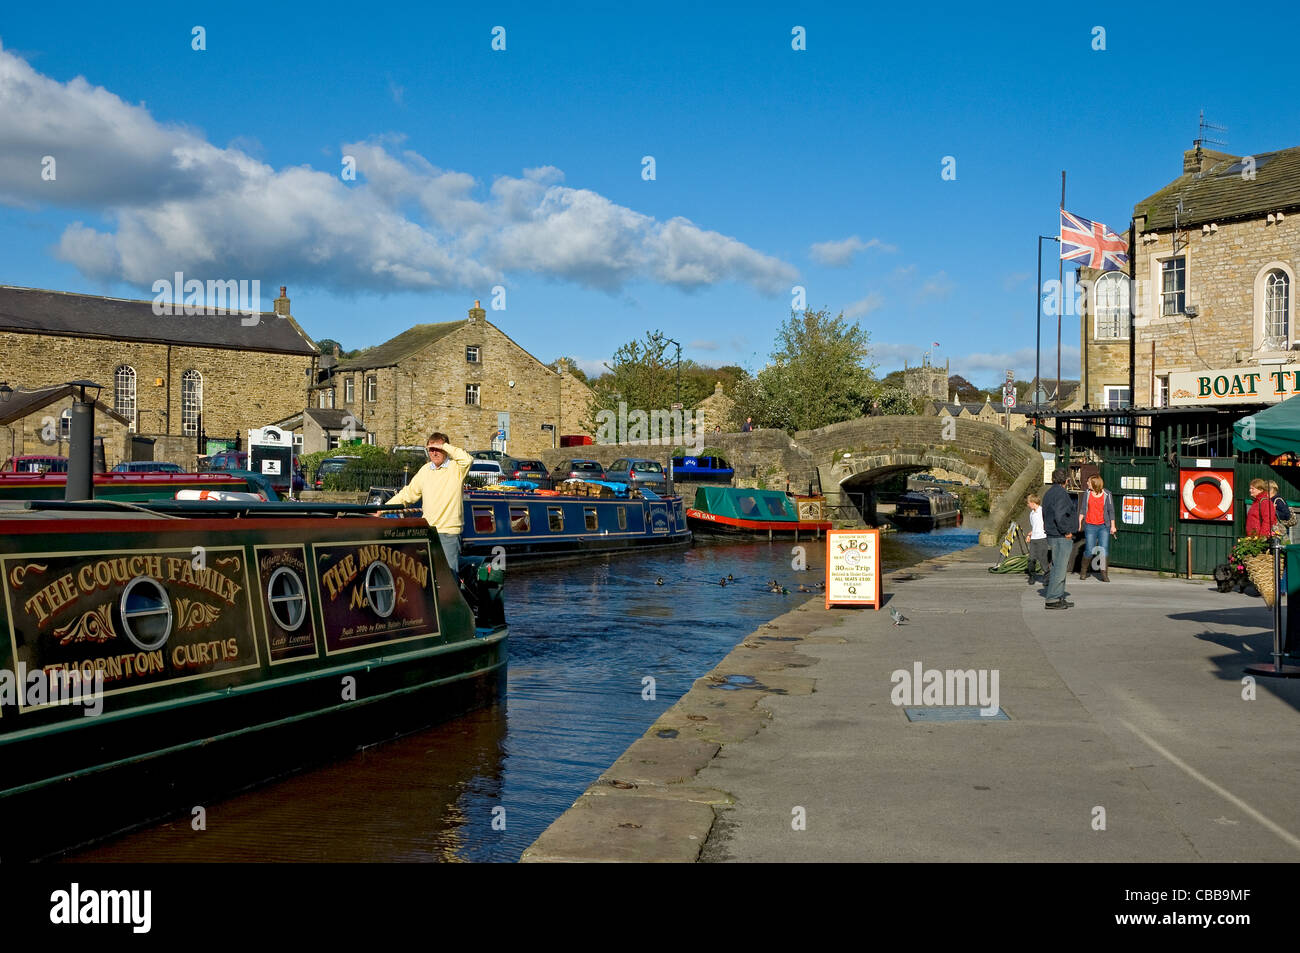 Narrow boats boat moored in the canal basin Skipton North Yorkshire Dales National Park England UK United Kingdom GB Great Britain Stock Photo